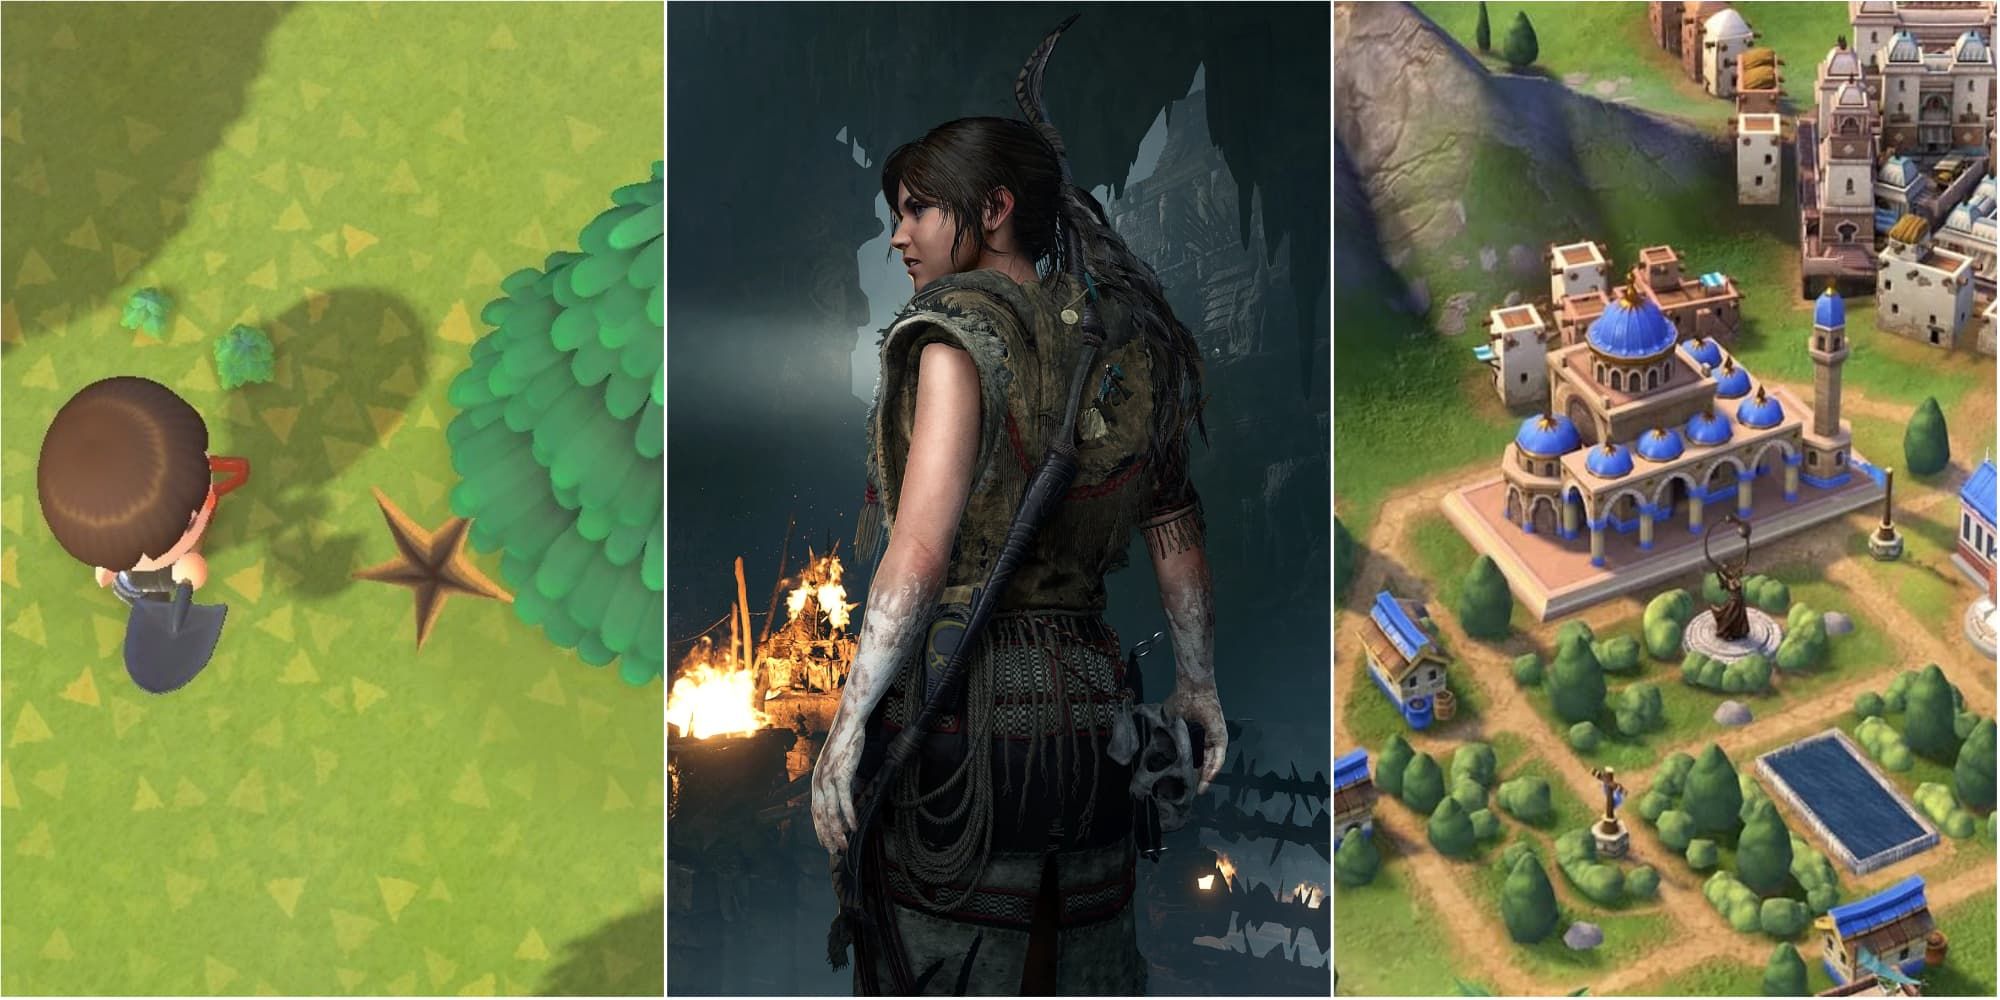 A villager approaches a dig spot in Animal Crossing, Lara Croft looks over her shoulder with a fire going in the background in Tomb Raider, and a city center stands tall with Indian architecture in Civilization VI.